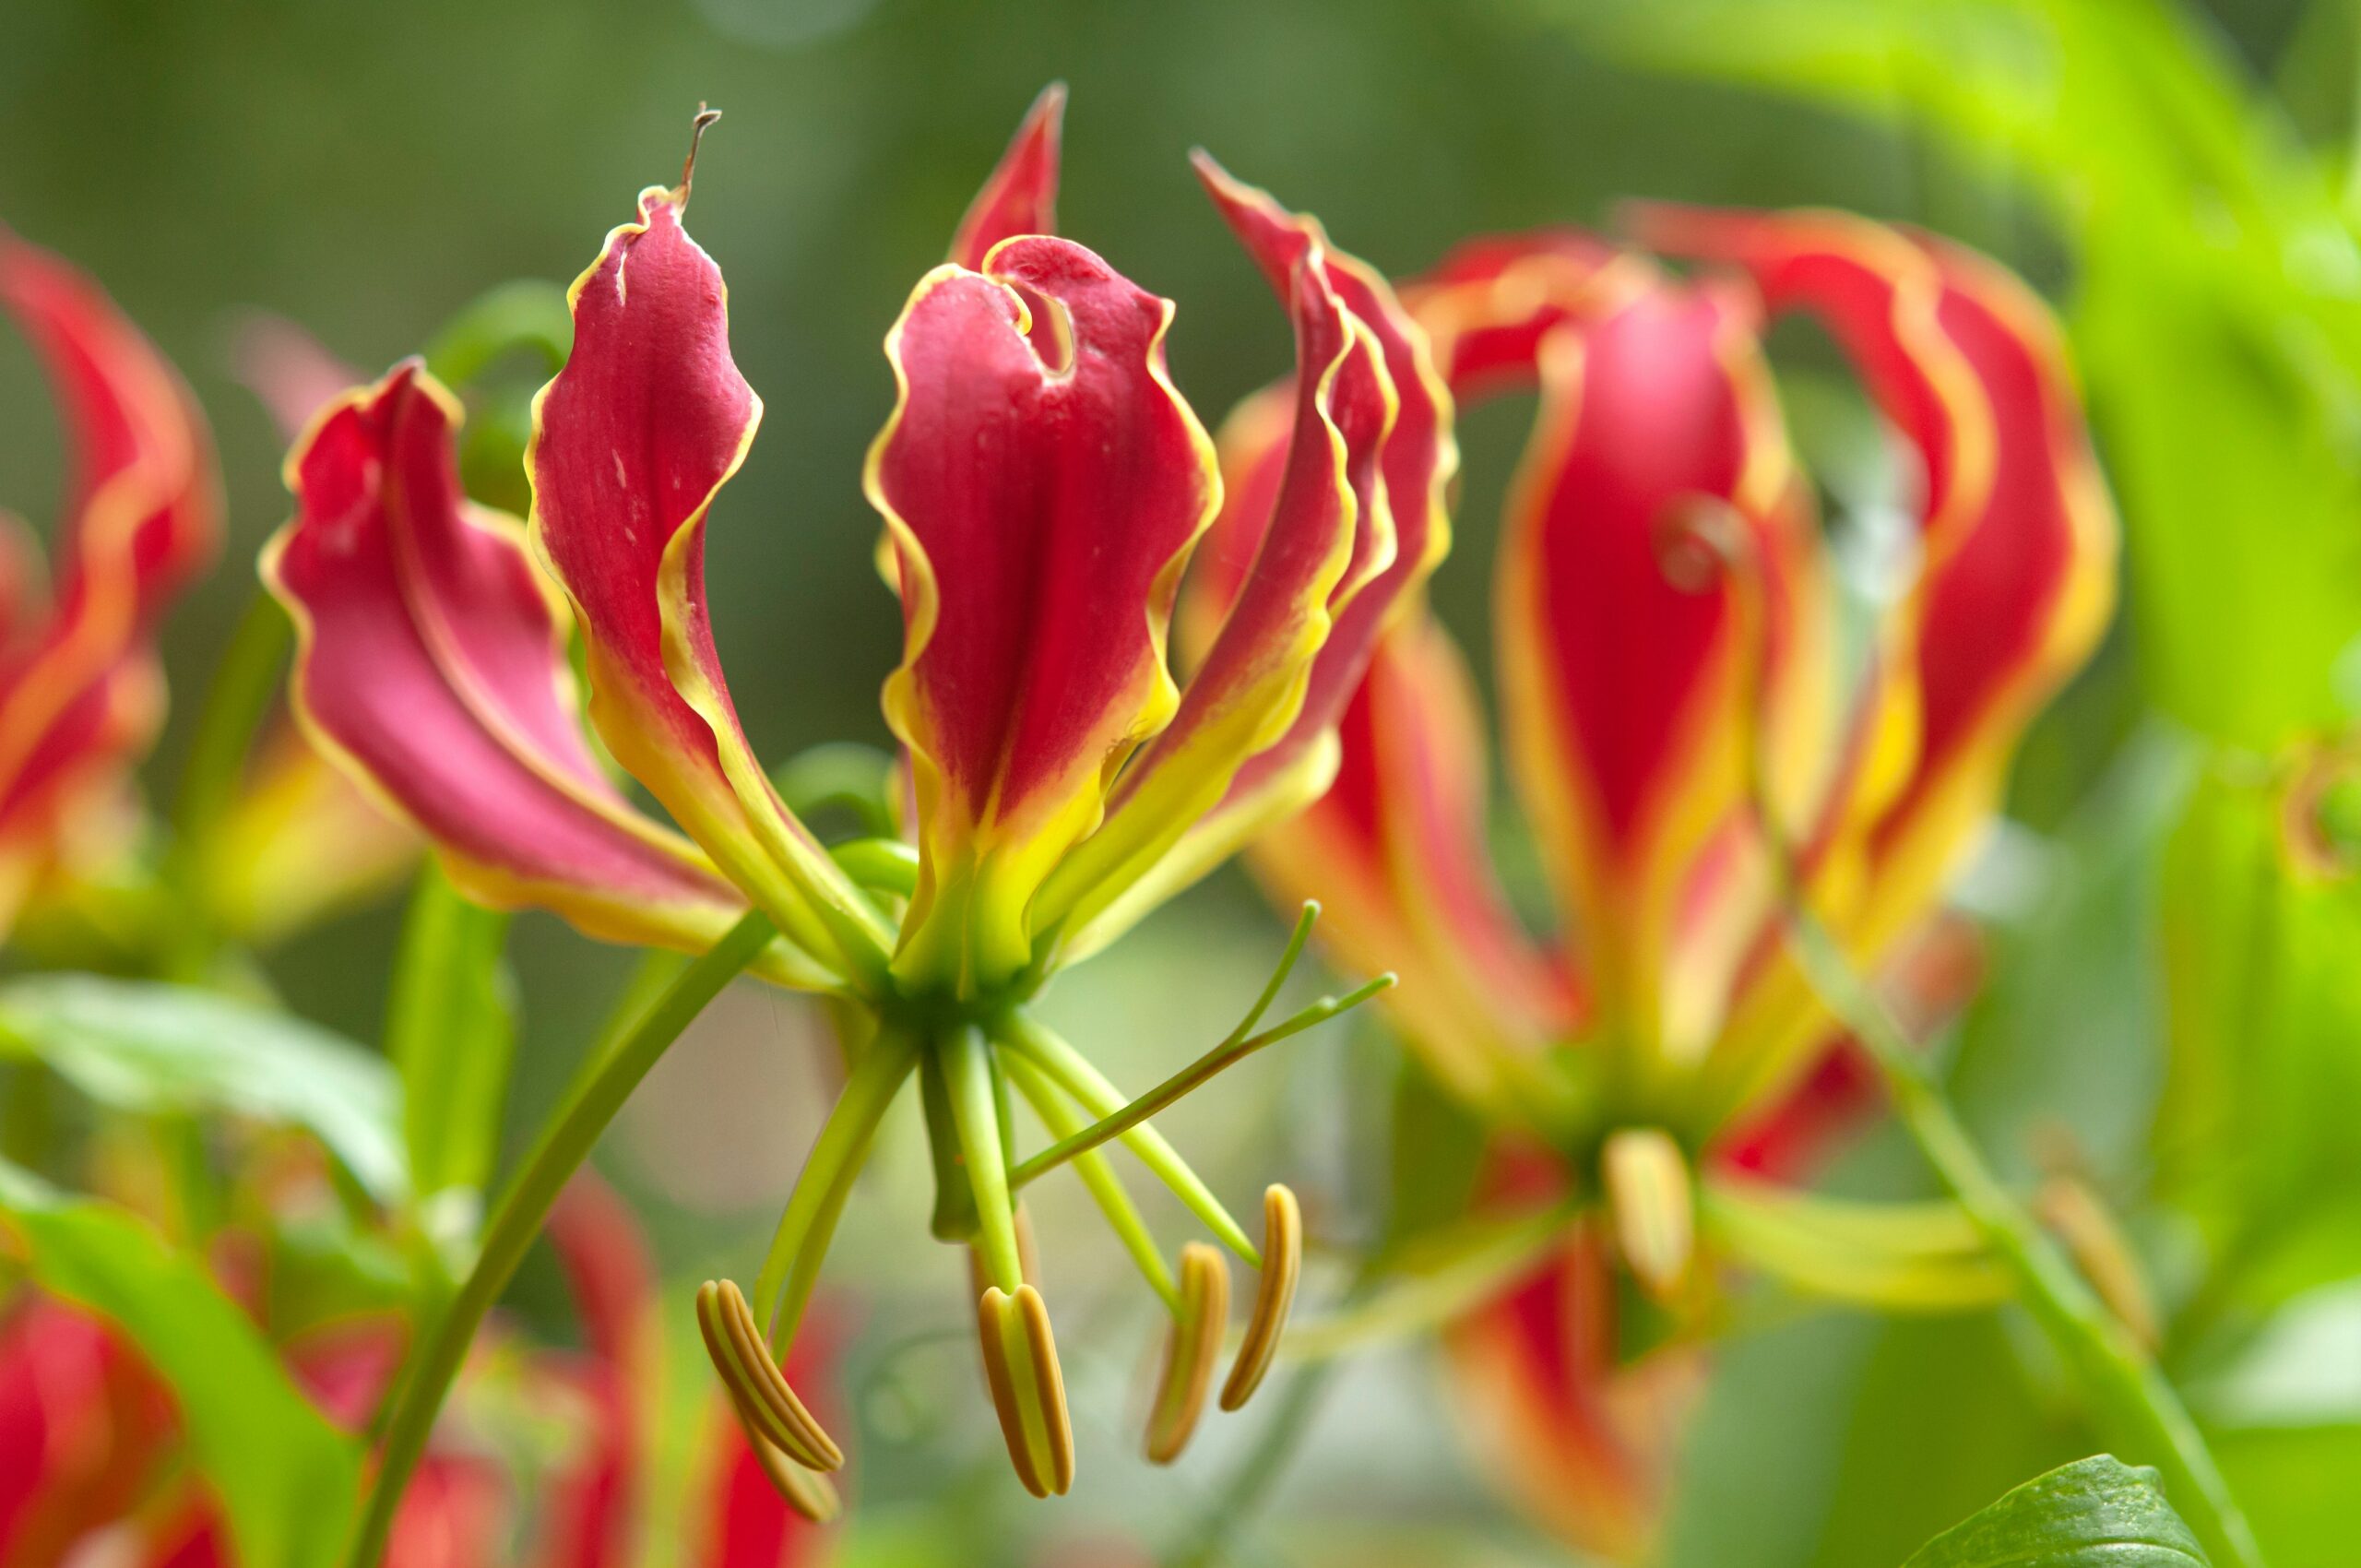 National flower of Zimbabwe - Flame lily